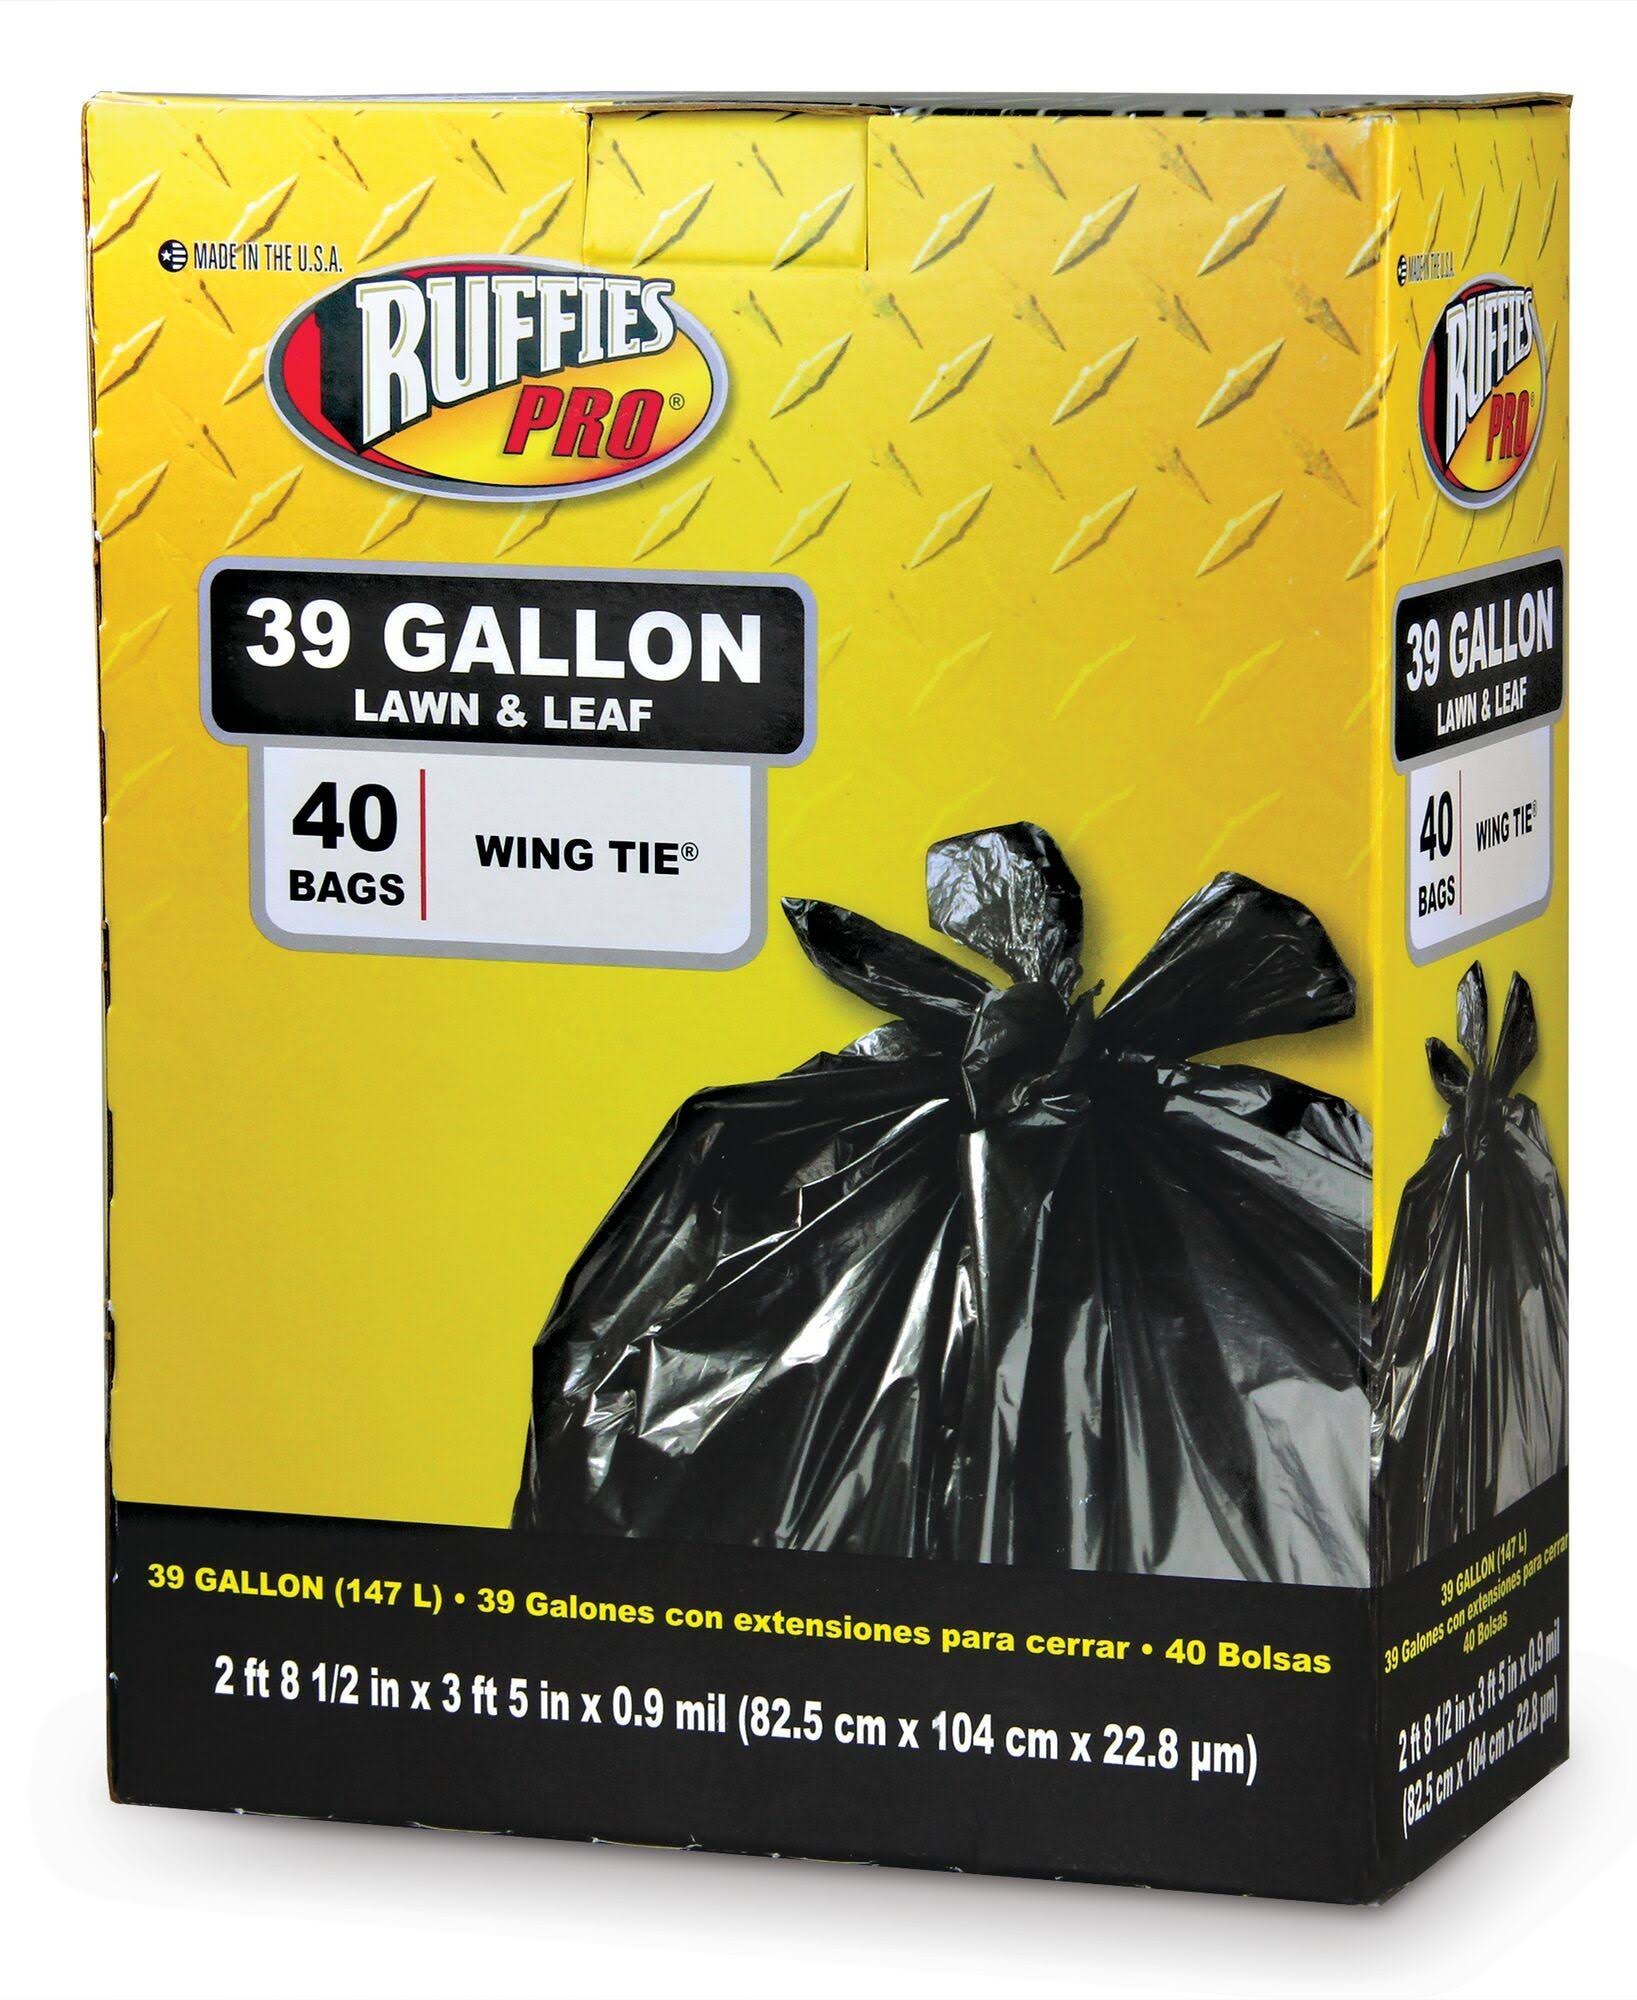 Ruffies Pro Wing Tie Lawn & Leaf Bags - 39gal, 40ct